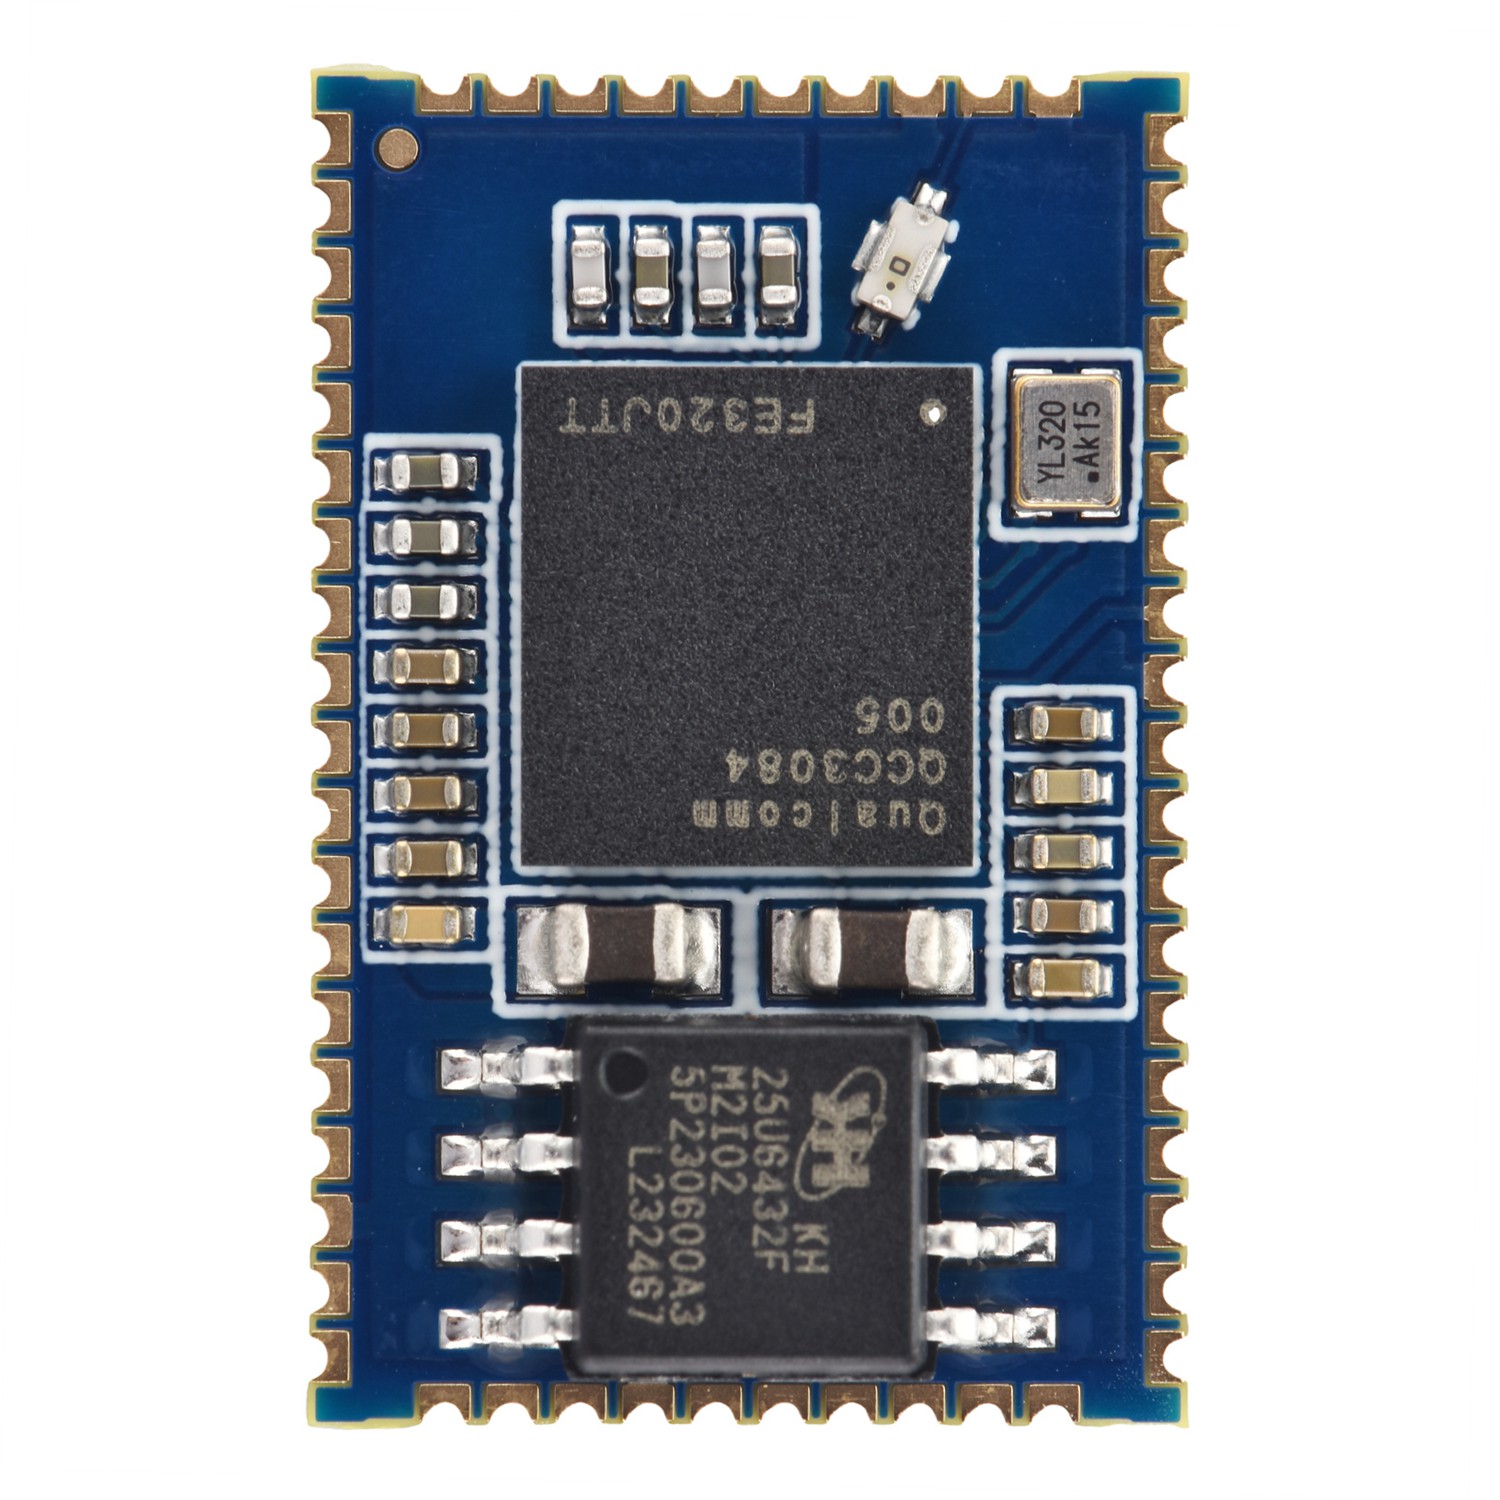 Introduction to BTM384 (QCC3084) Bluetooth module